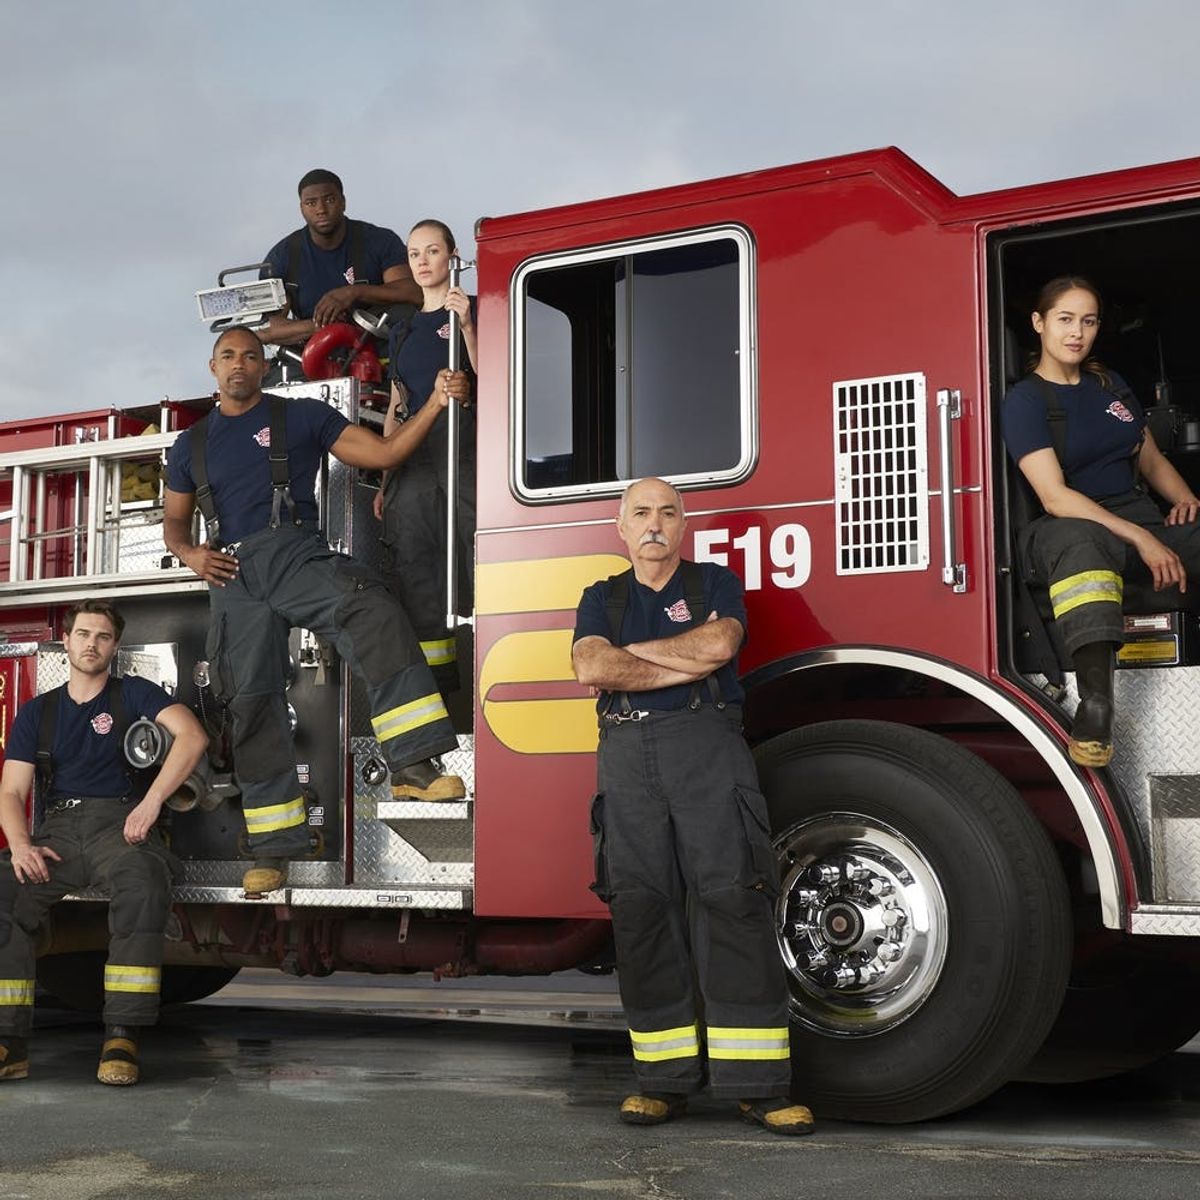 This ‘Station 19’ Season 2 Promo Is Almost *Too* Intense